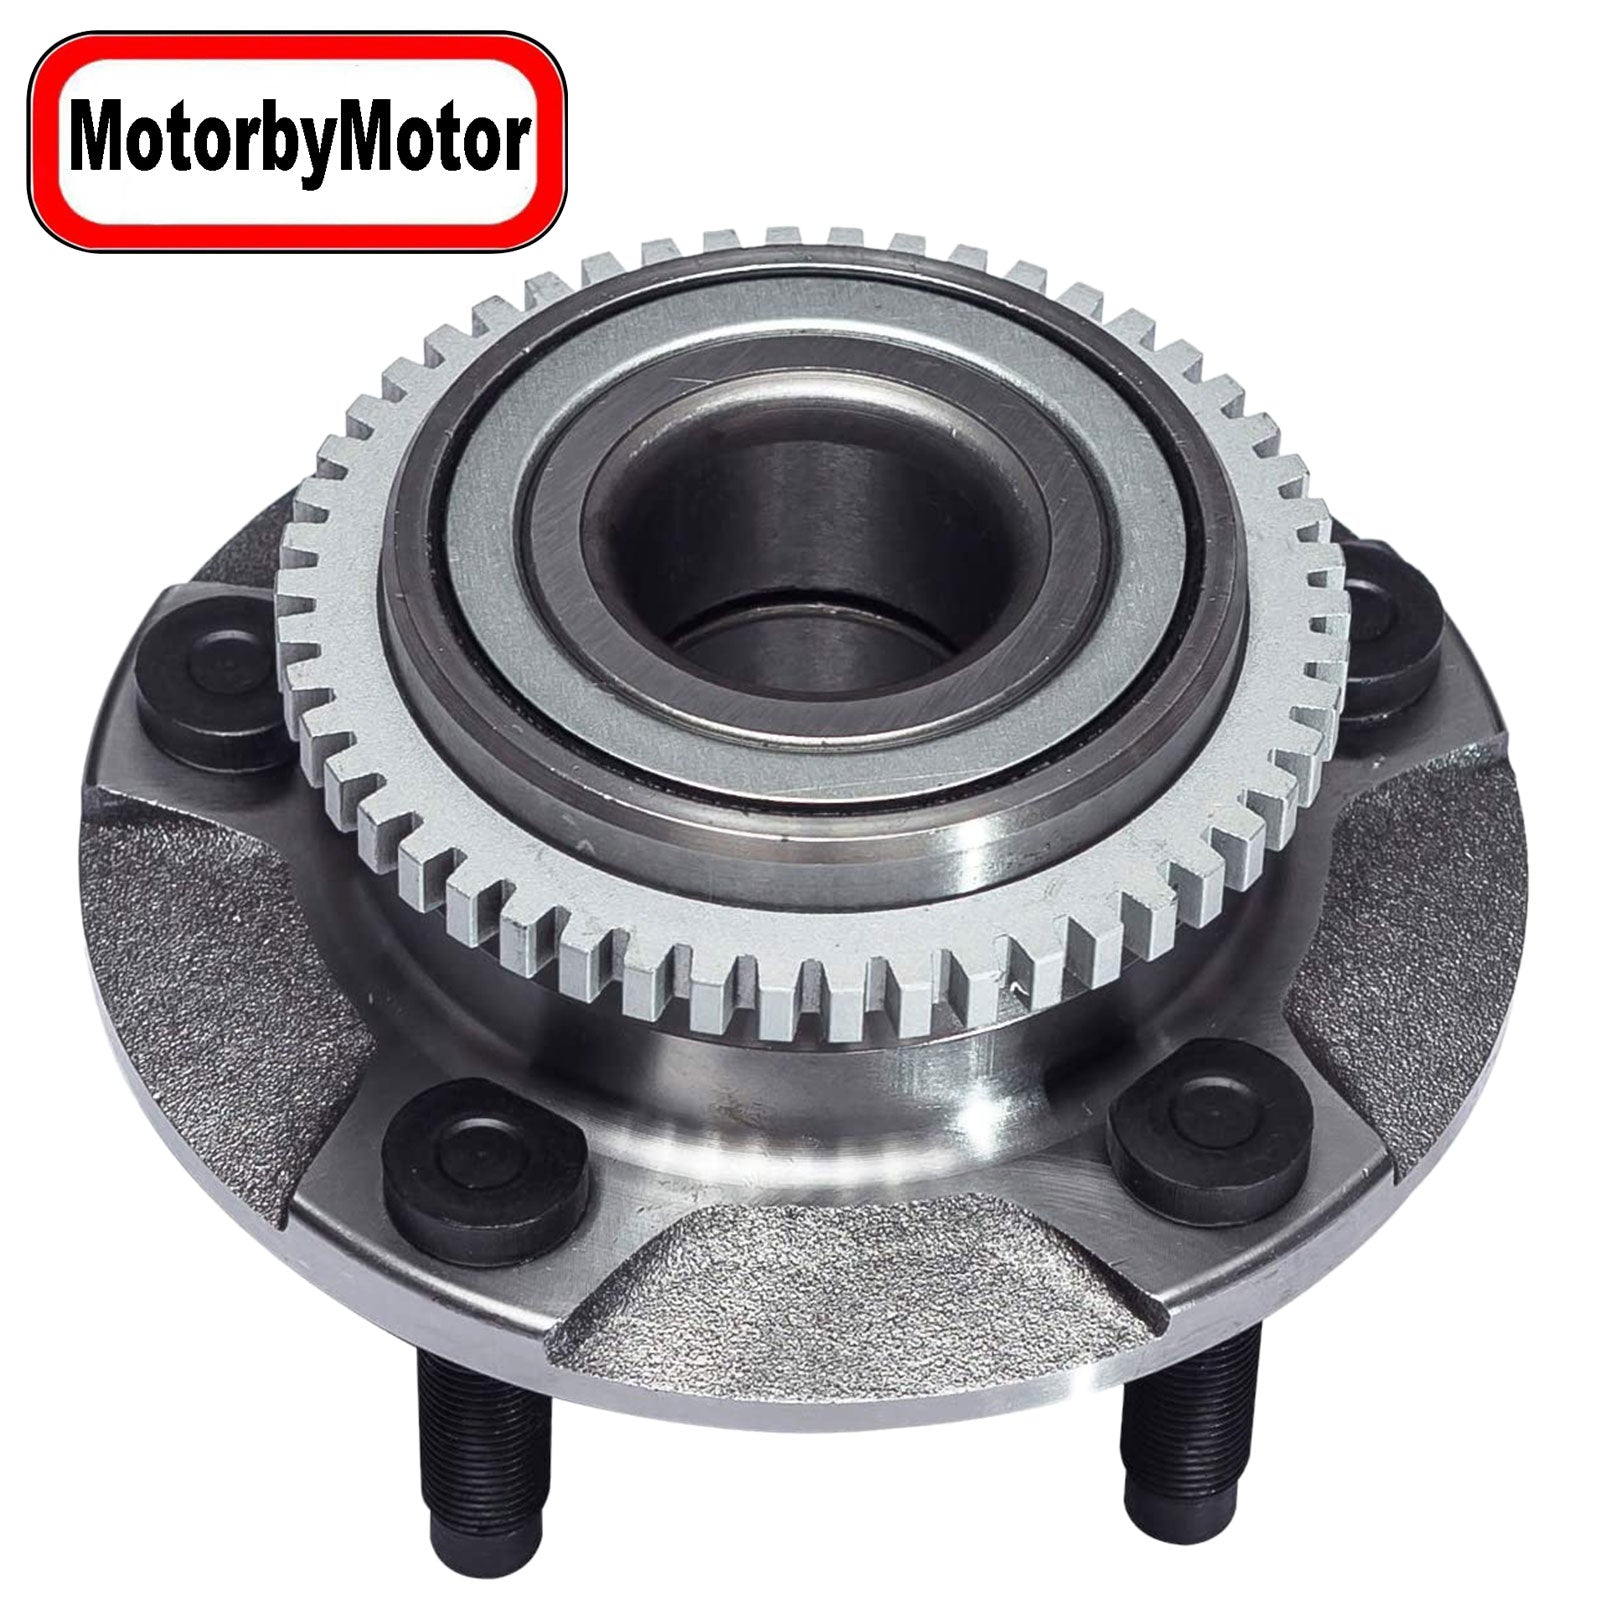 MotorbyMotor 513115 Front Heavy Duty Wheel Bearing Assembly with 5 Lugs Fits for 1994-2004 Ford Mustang Wheel Bearing and Hub Assembly (w/ABS Tone Ring) MotorbyMotor